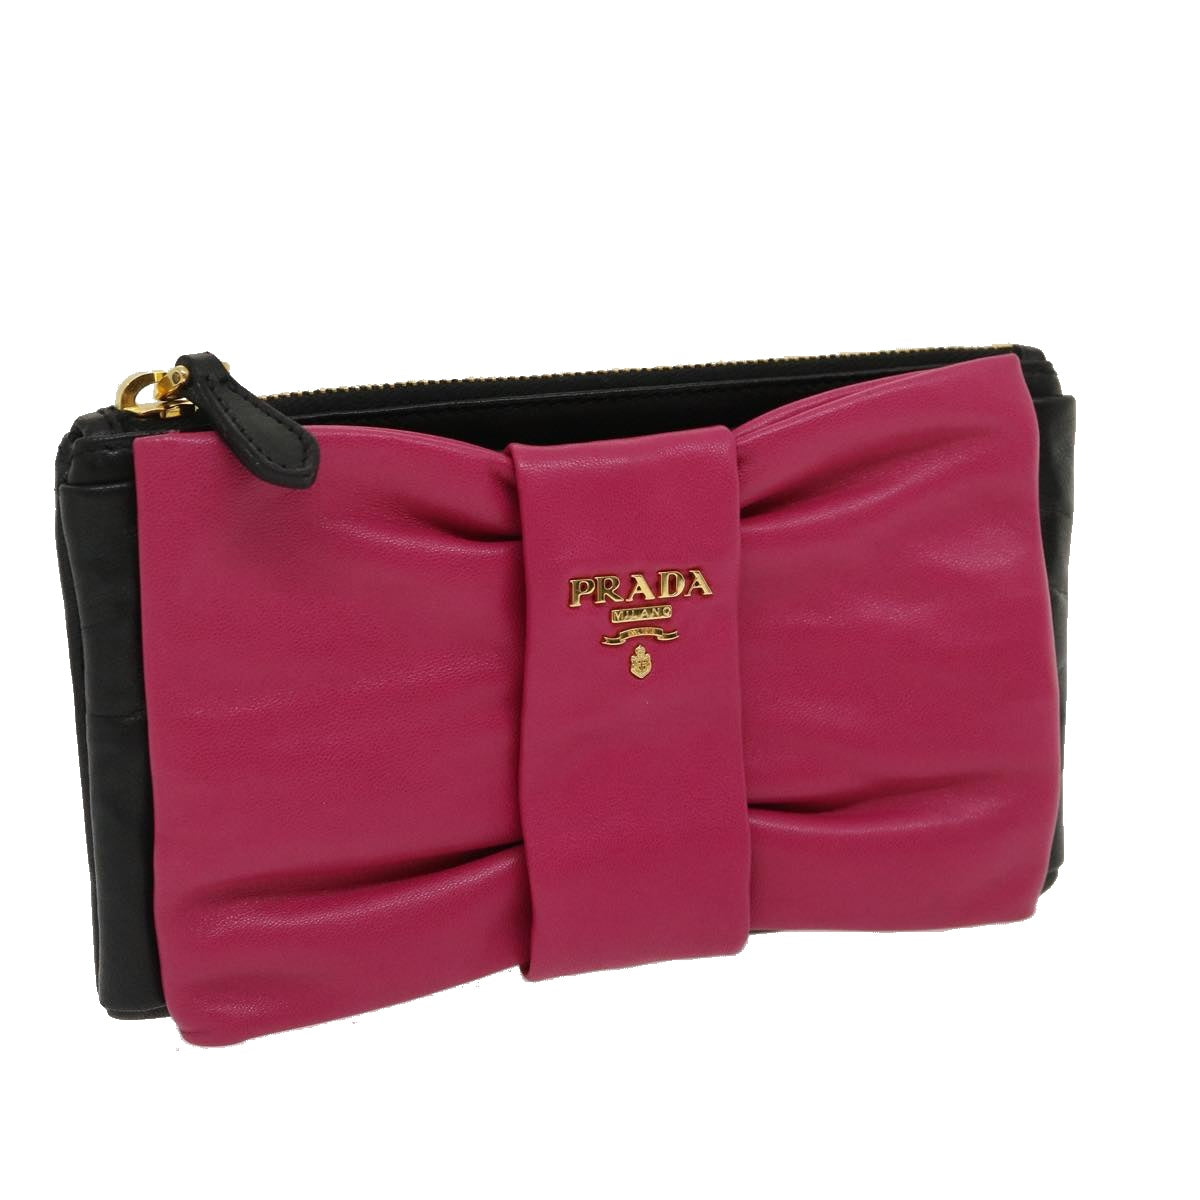 PRADA ribbon Pouch Leather Black Pink Auth 29901A